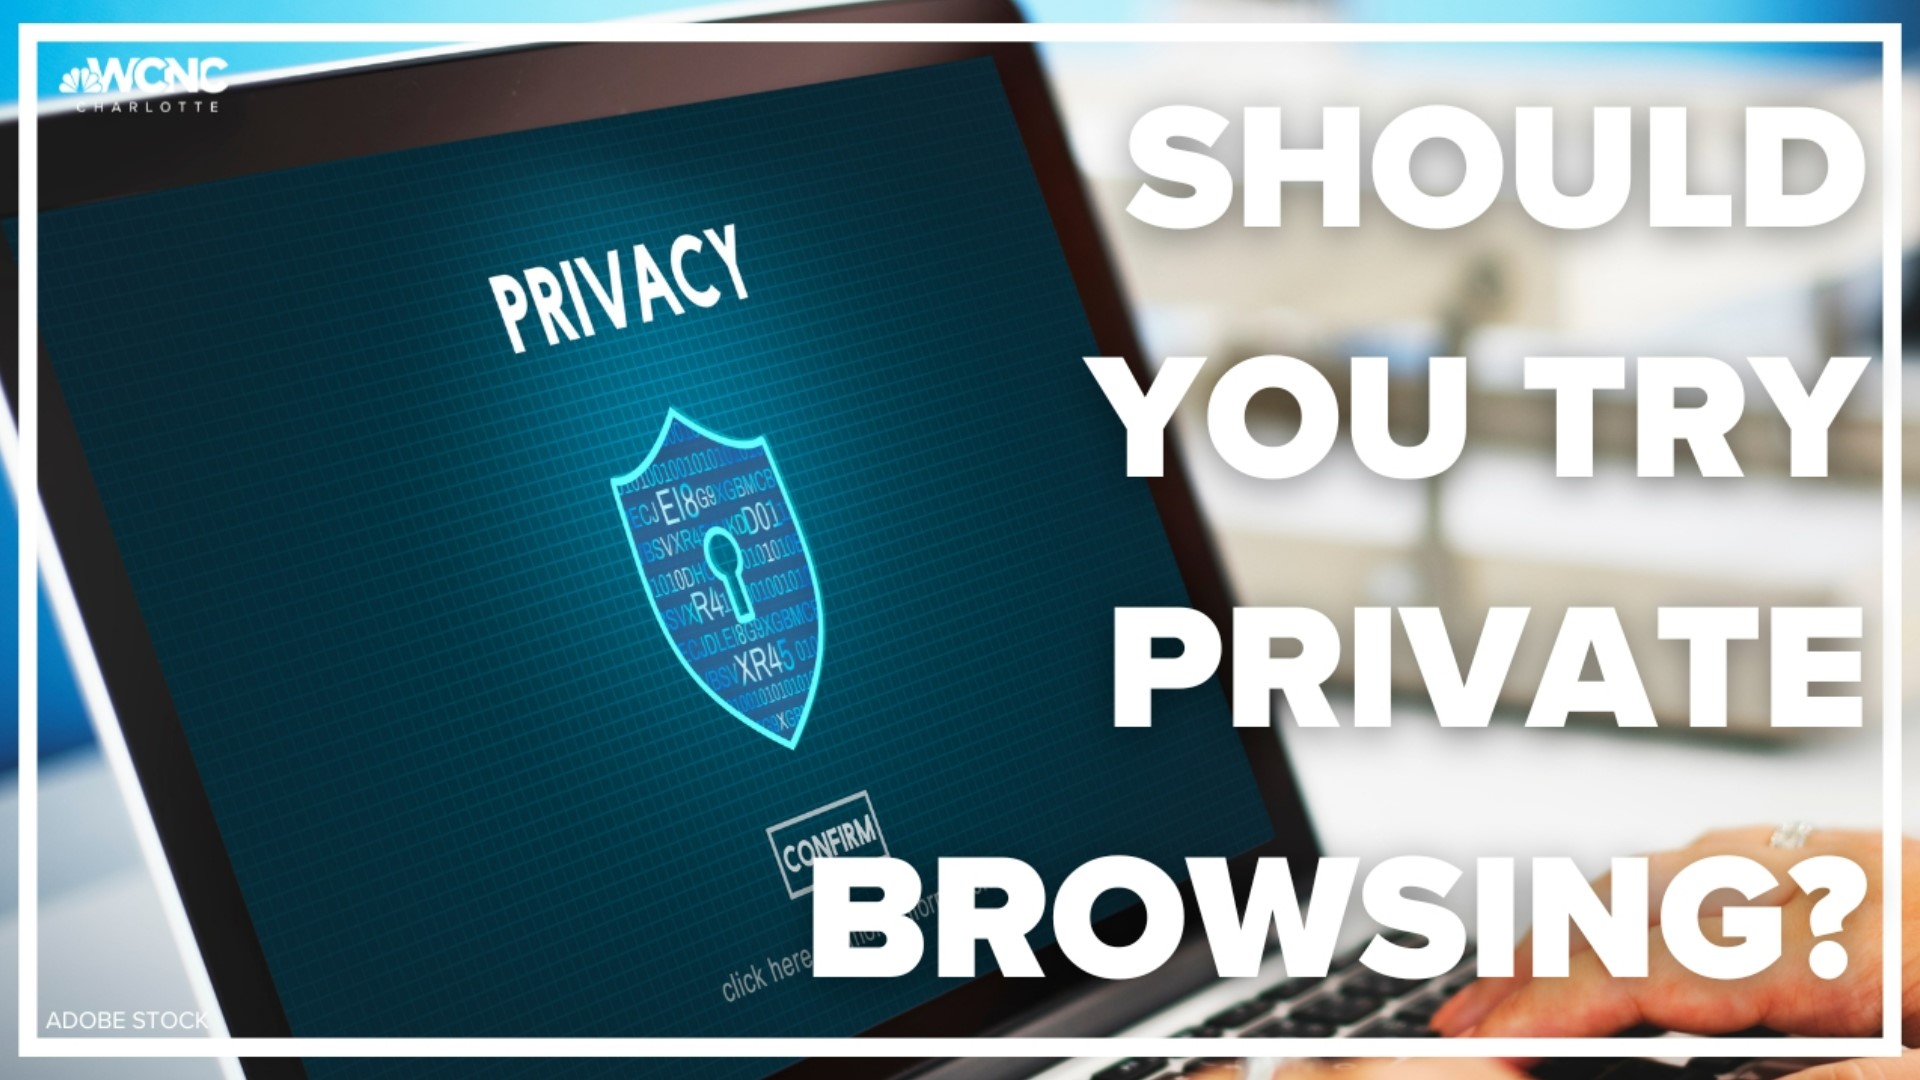 Shopping online is easy, but did you know some stores charge more based on your location? Private browsing can save money and protect your personal information.